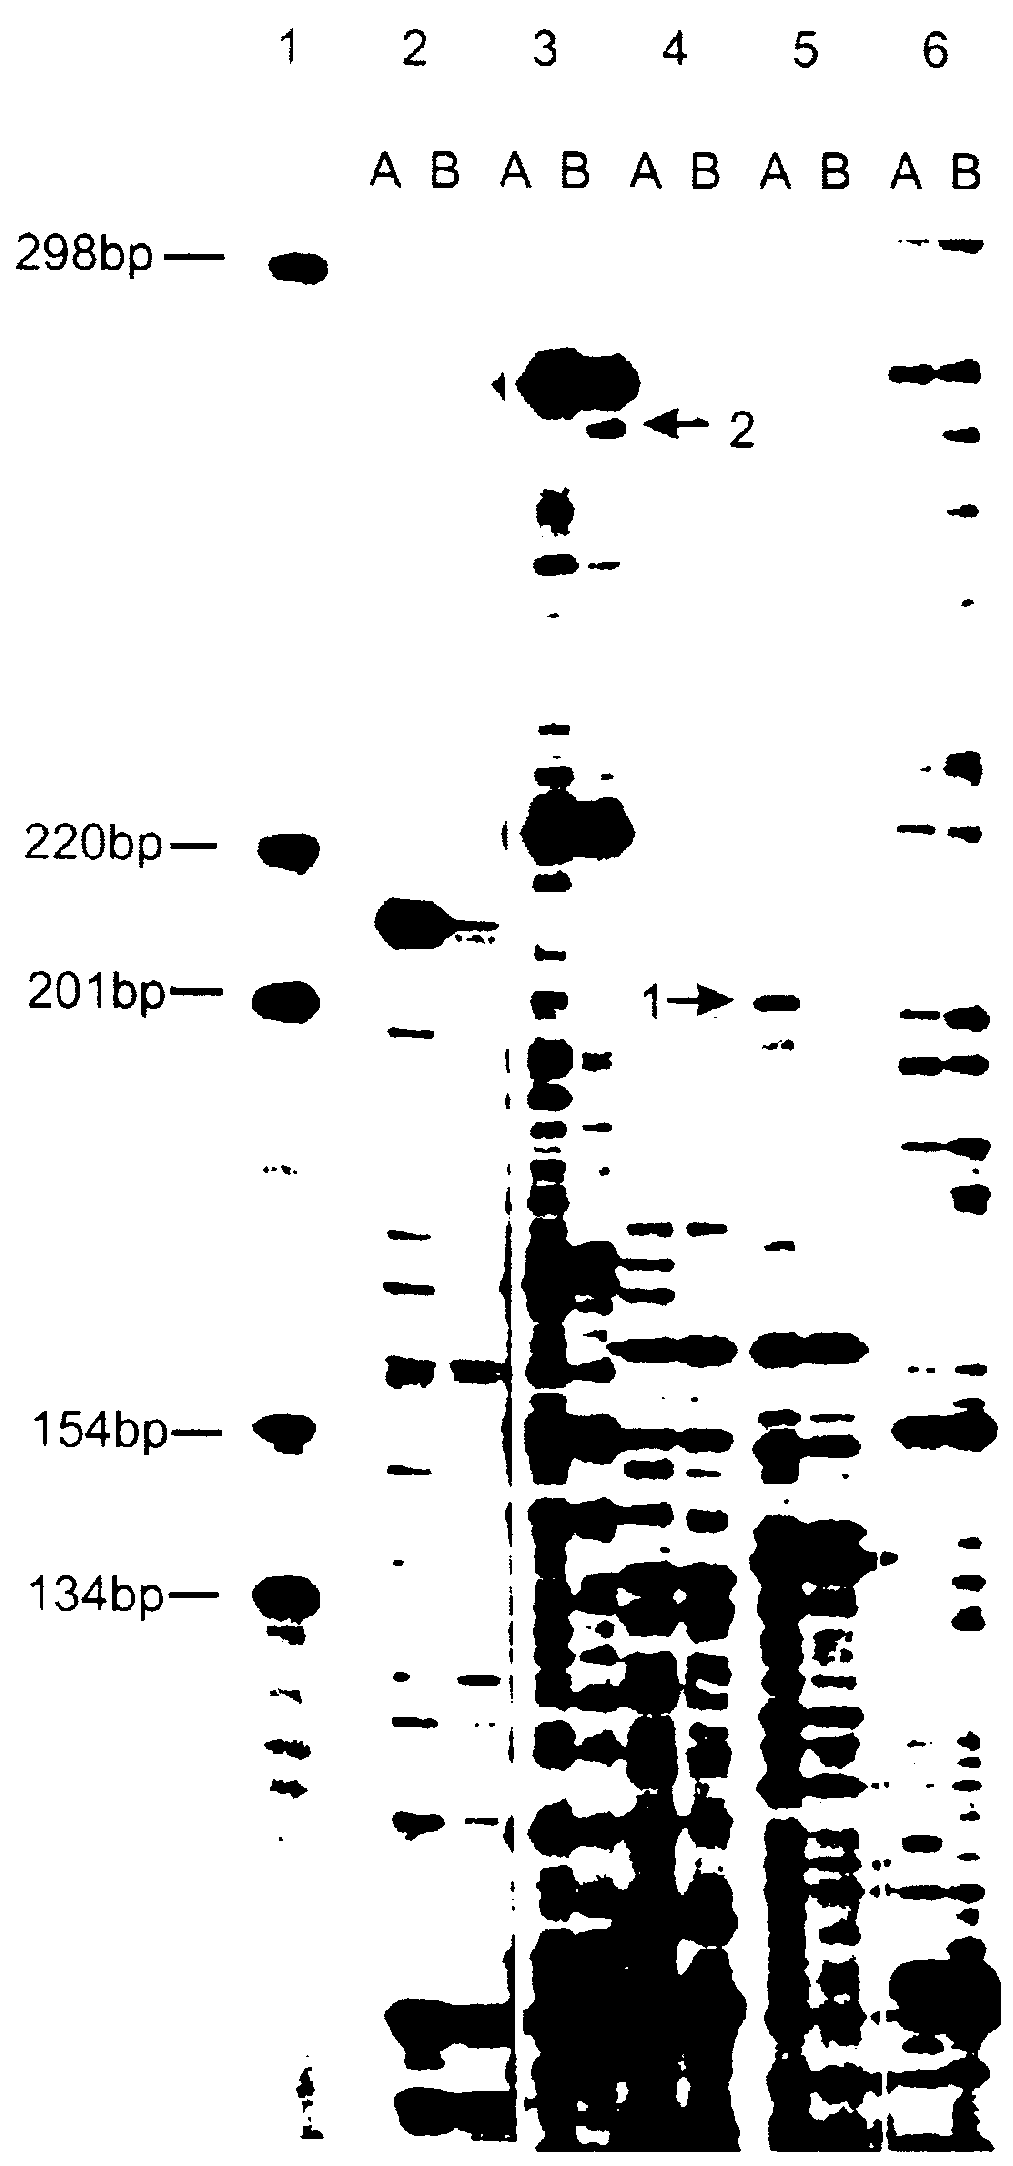 Method of identification and cloning differentially expressed messenger RNAs